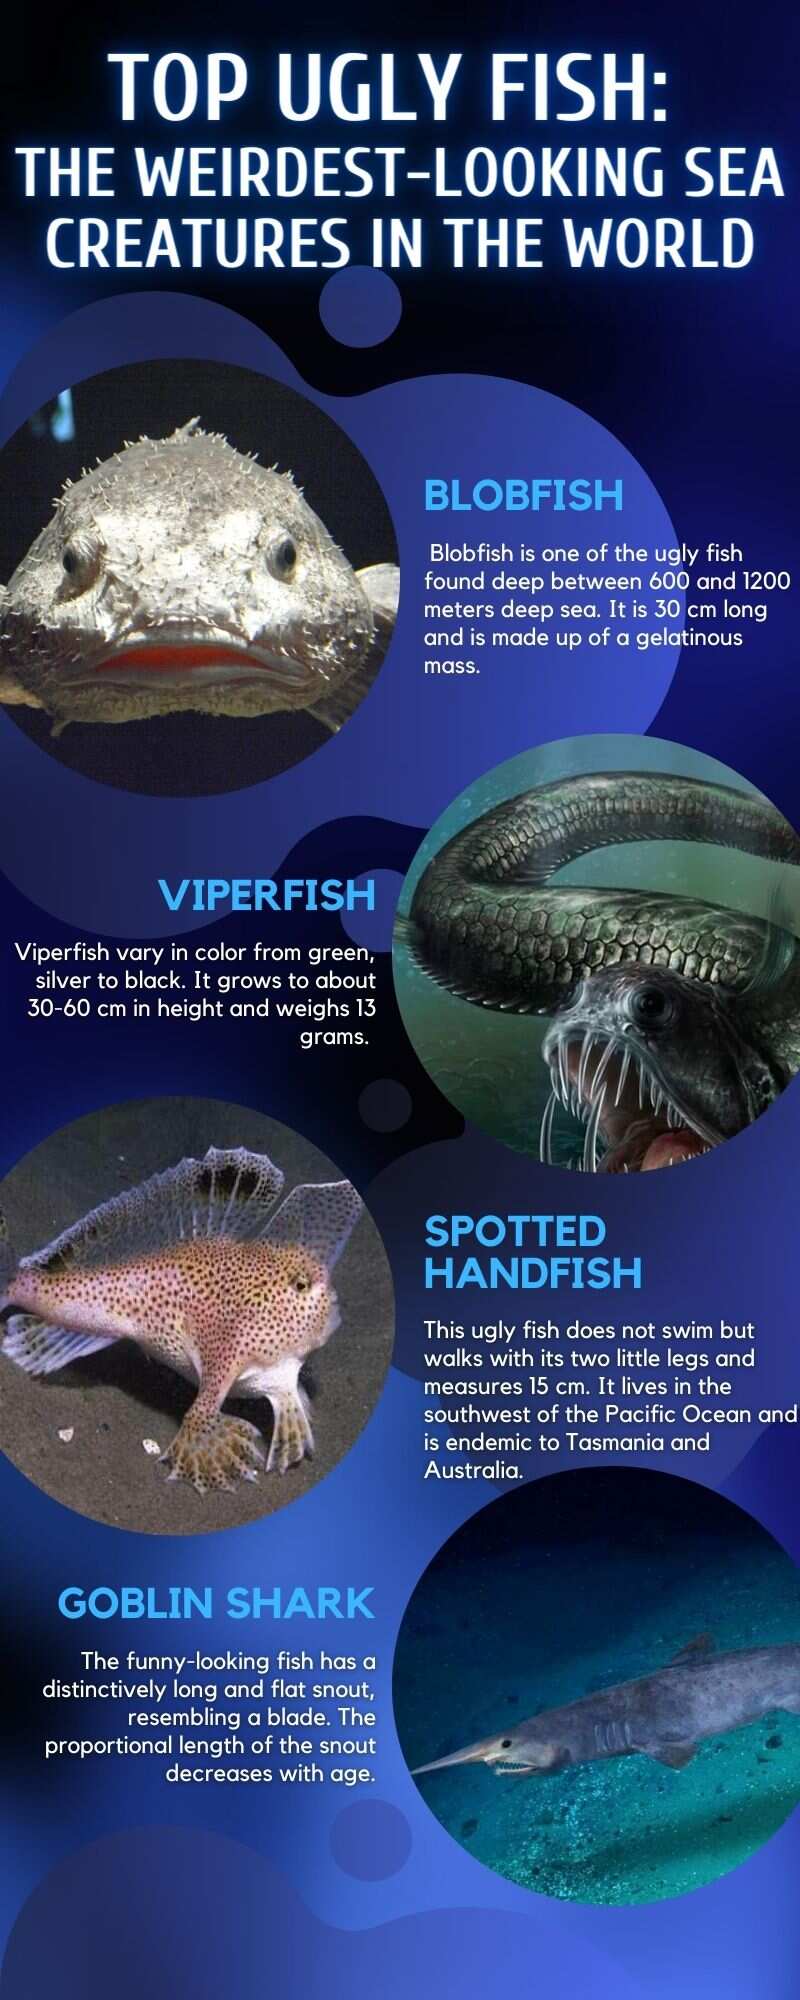 Top 10 ugly fish: the weirdest-looking sea creatures in the world 